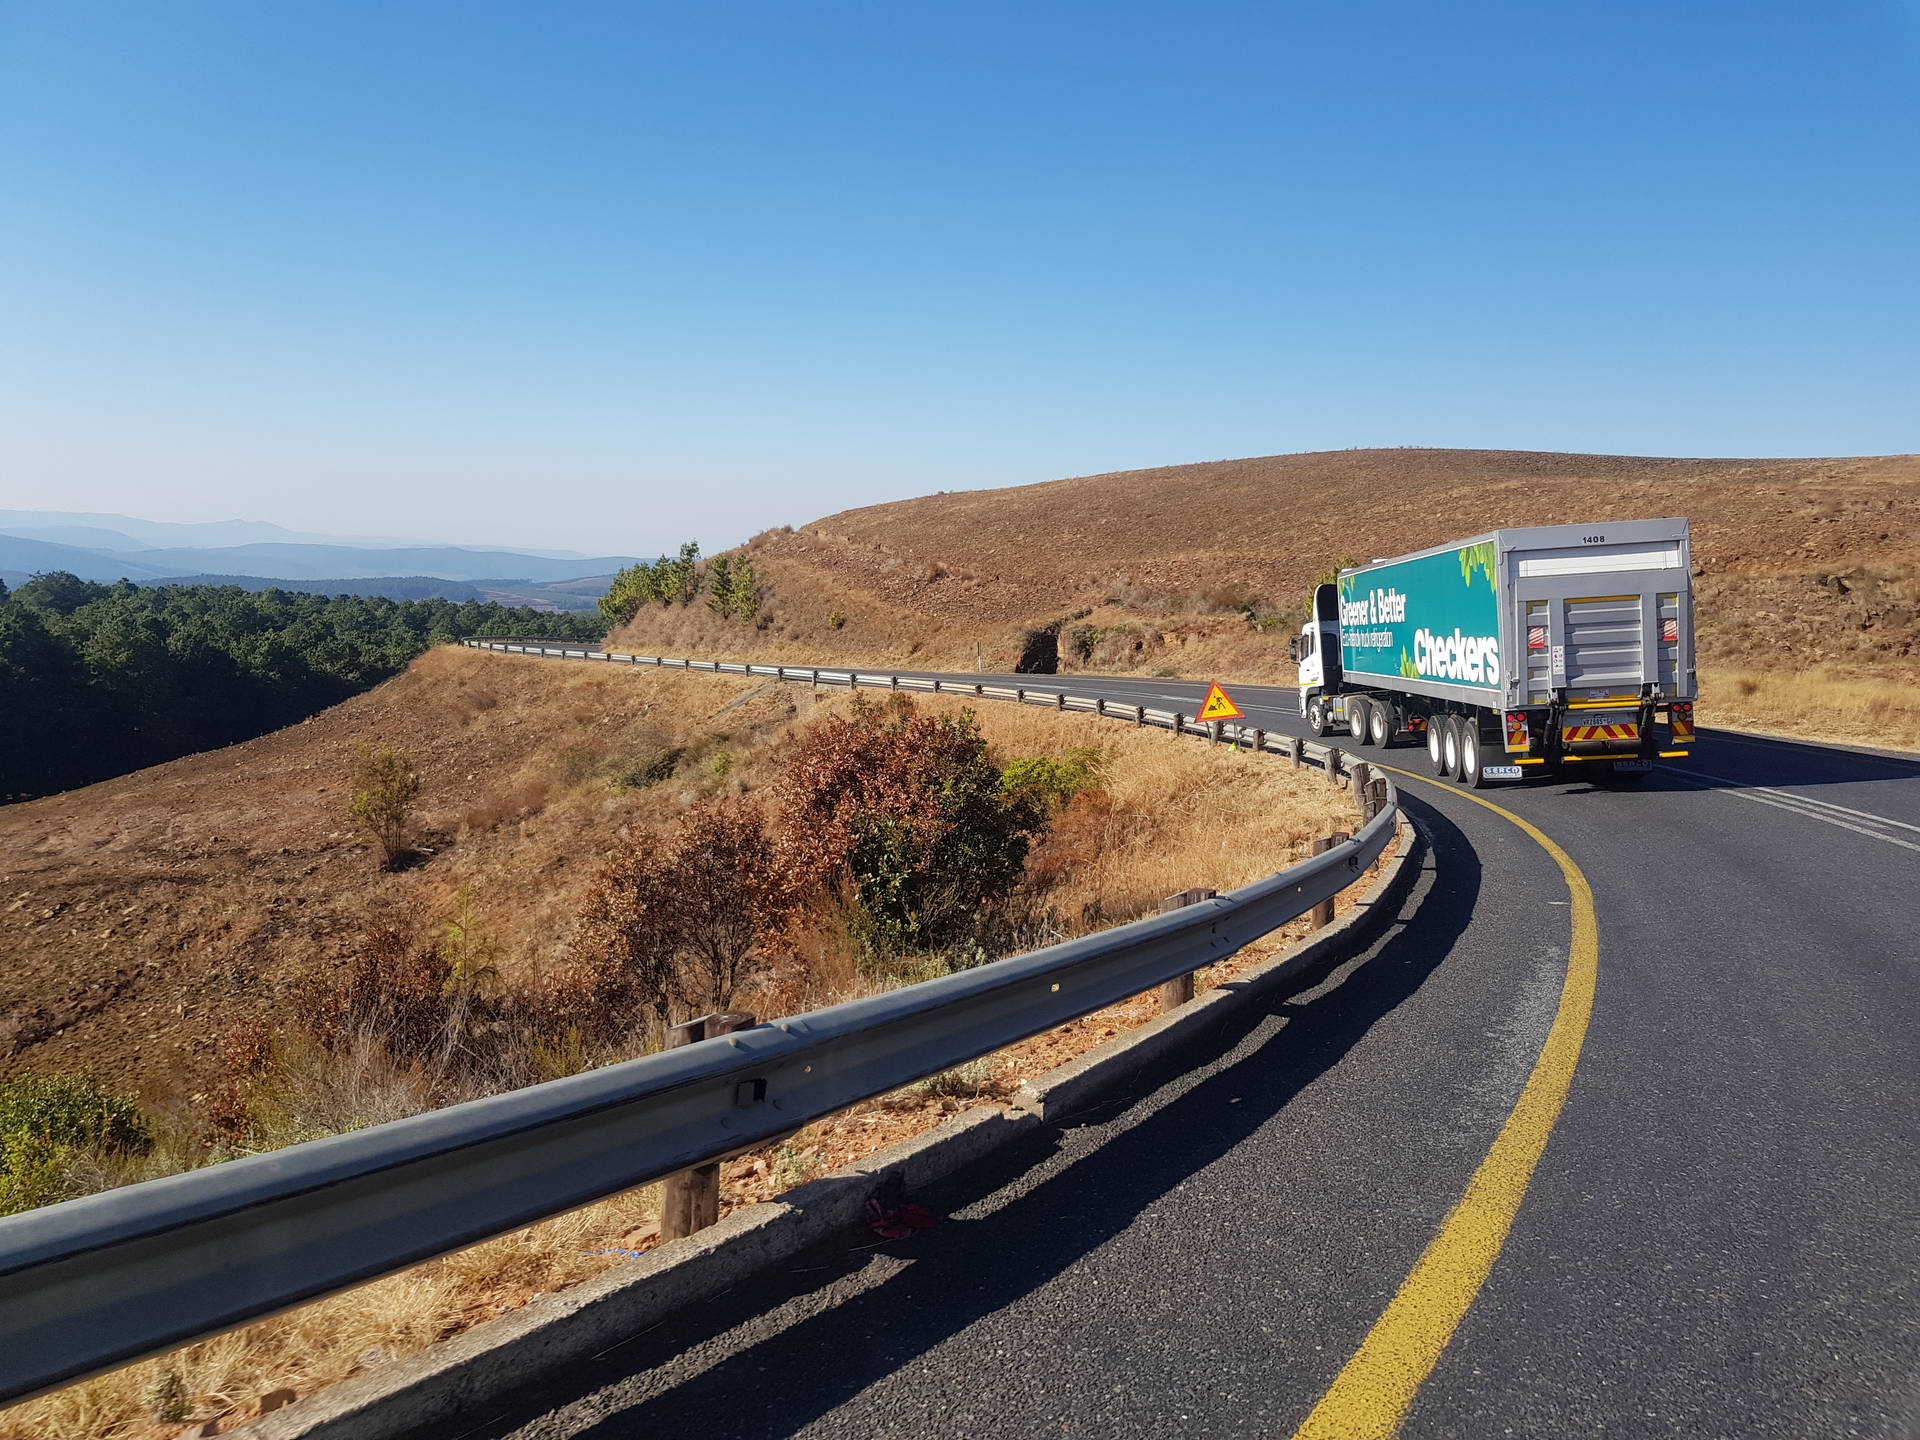 Truck Mpumalanga South Africa Highway Background